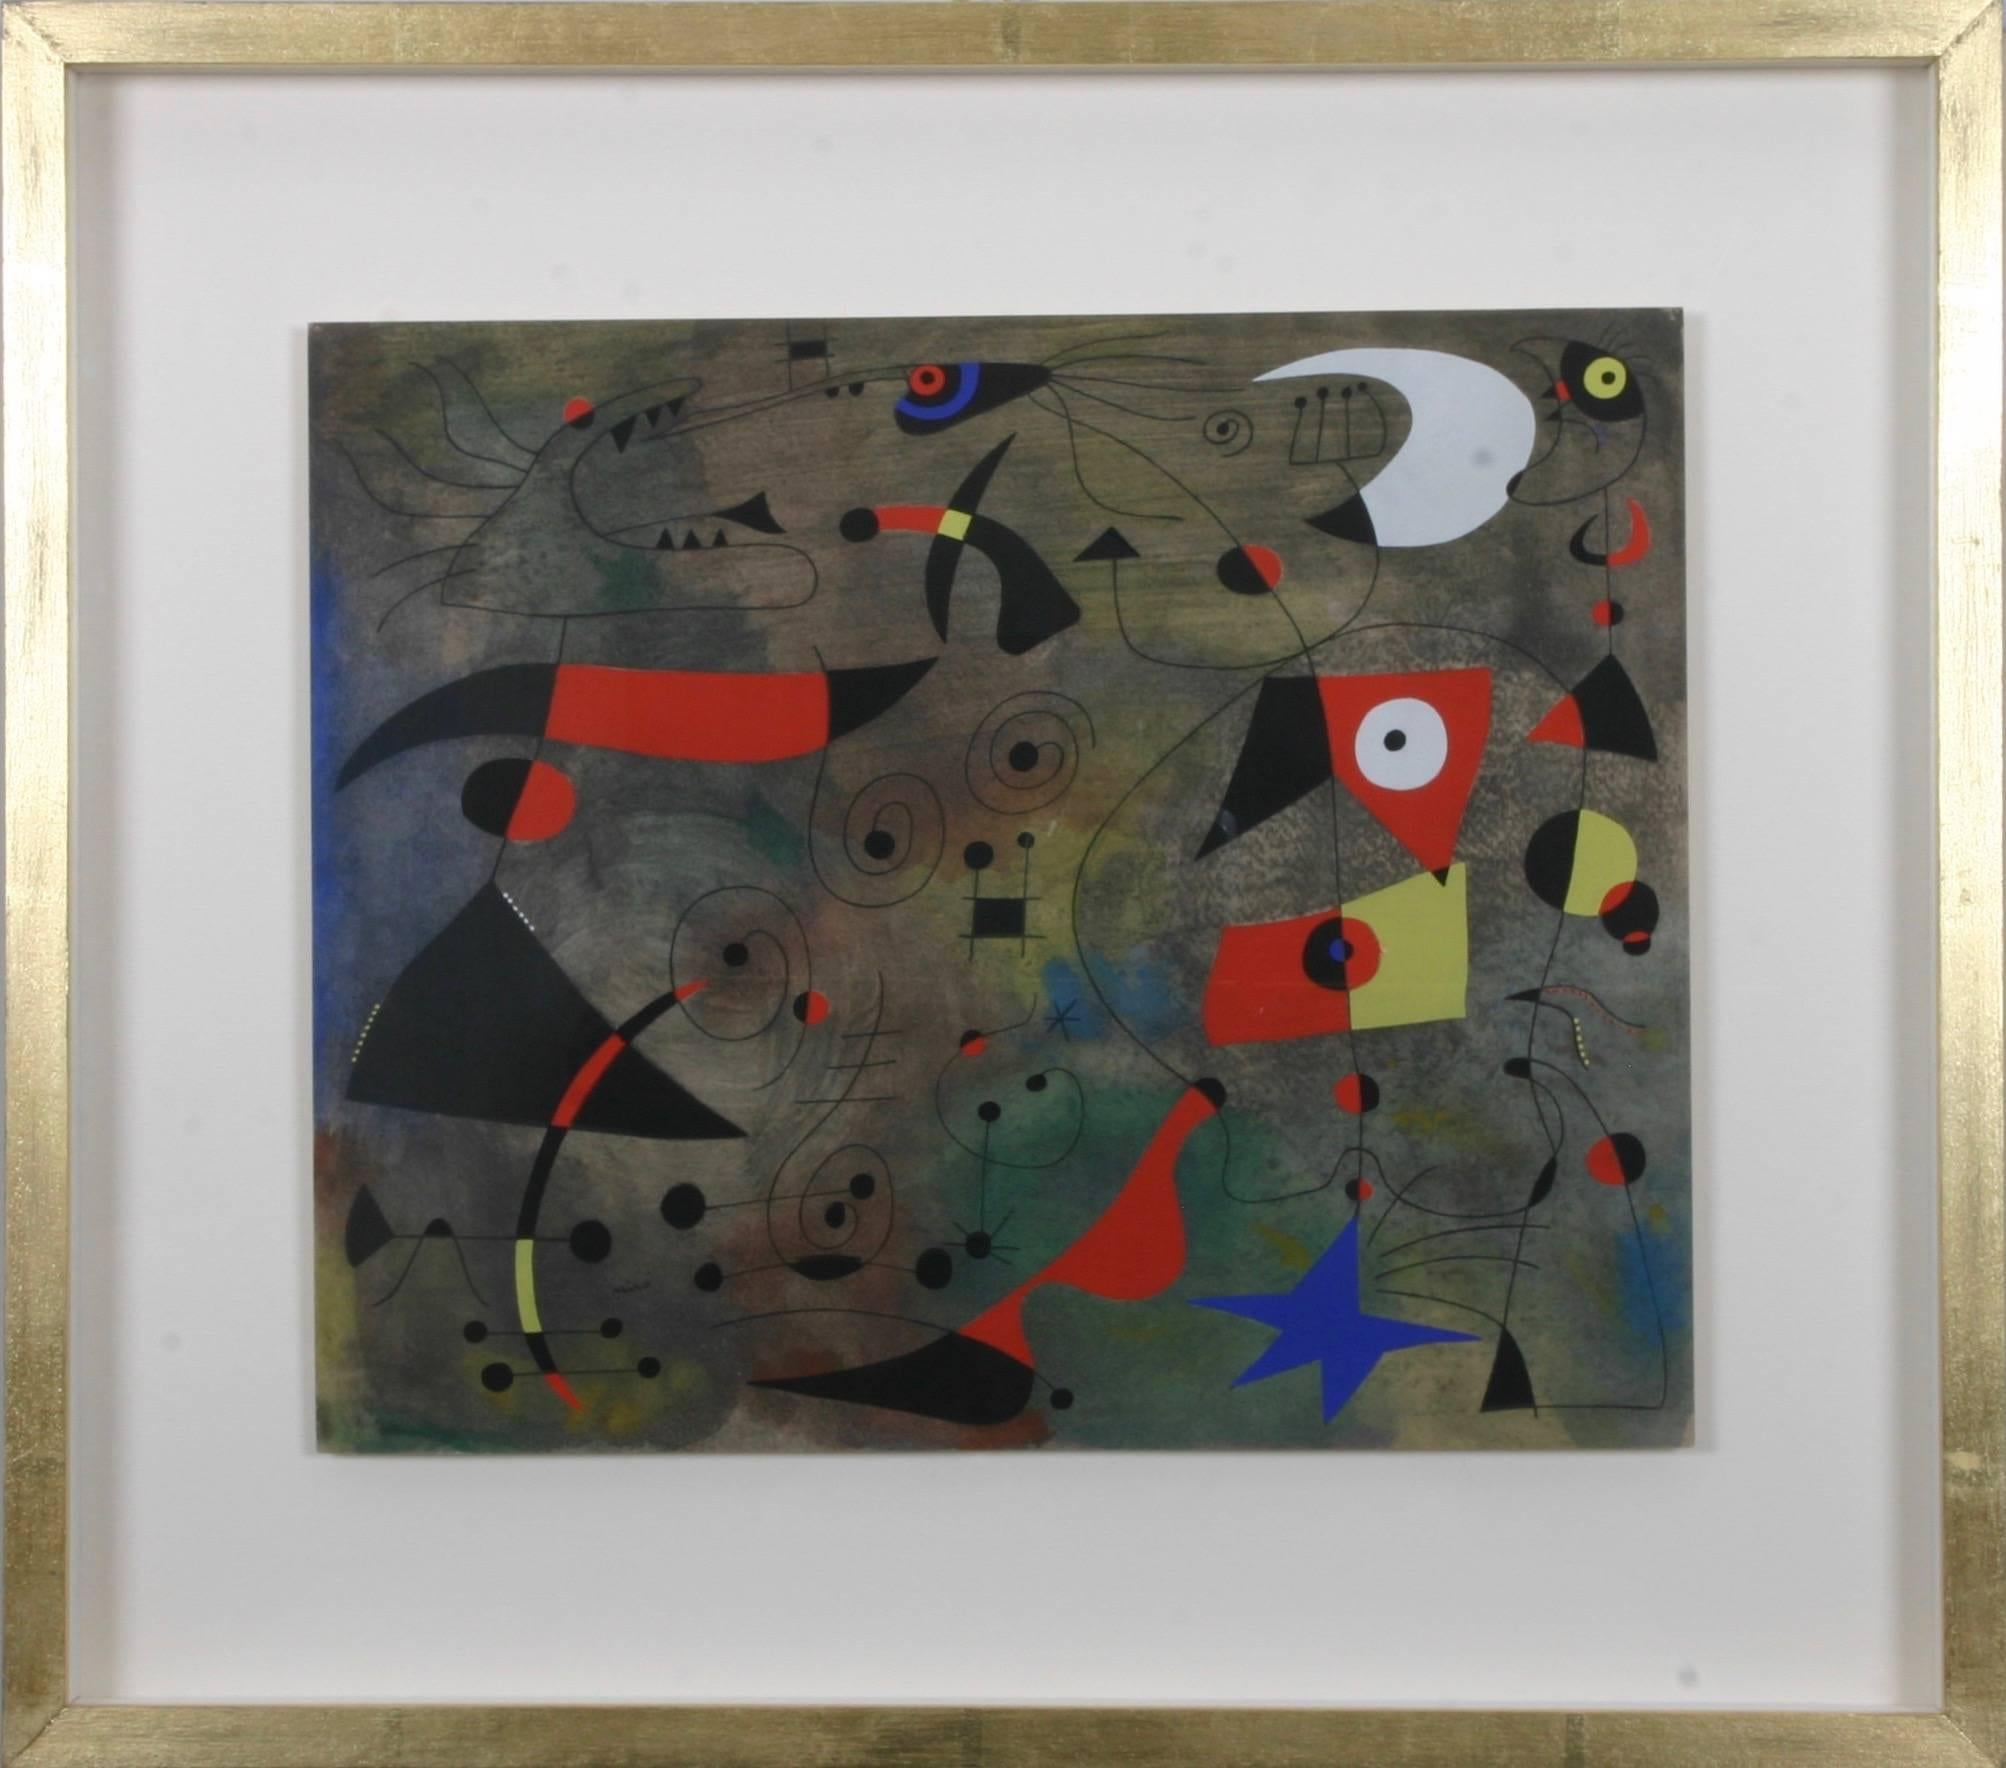 (after) Joan Miró Abstract Print - The Constellations: Femme et Oiseaux /Woman and Bird, Plt III 